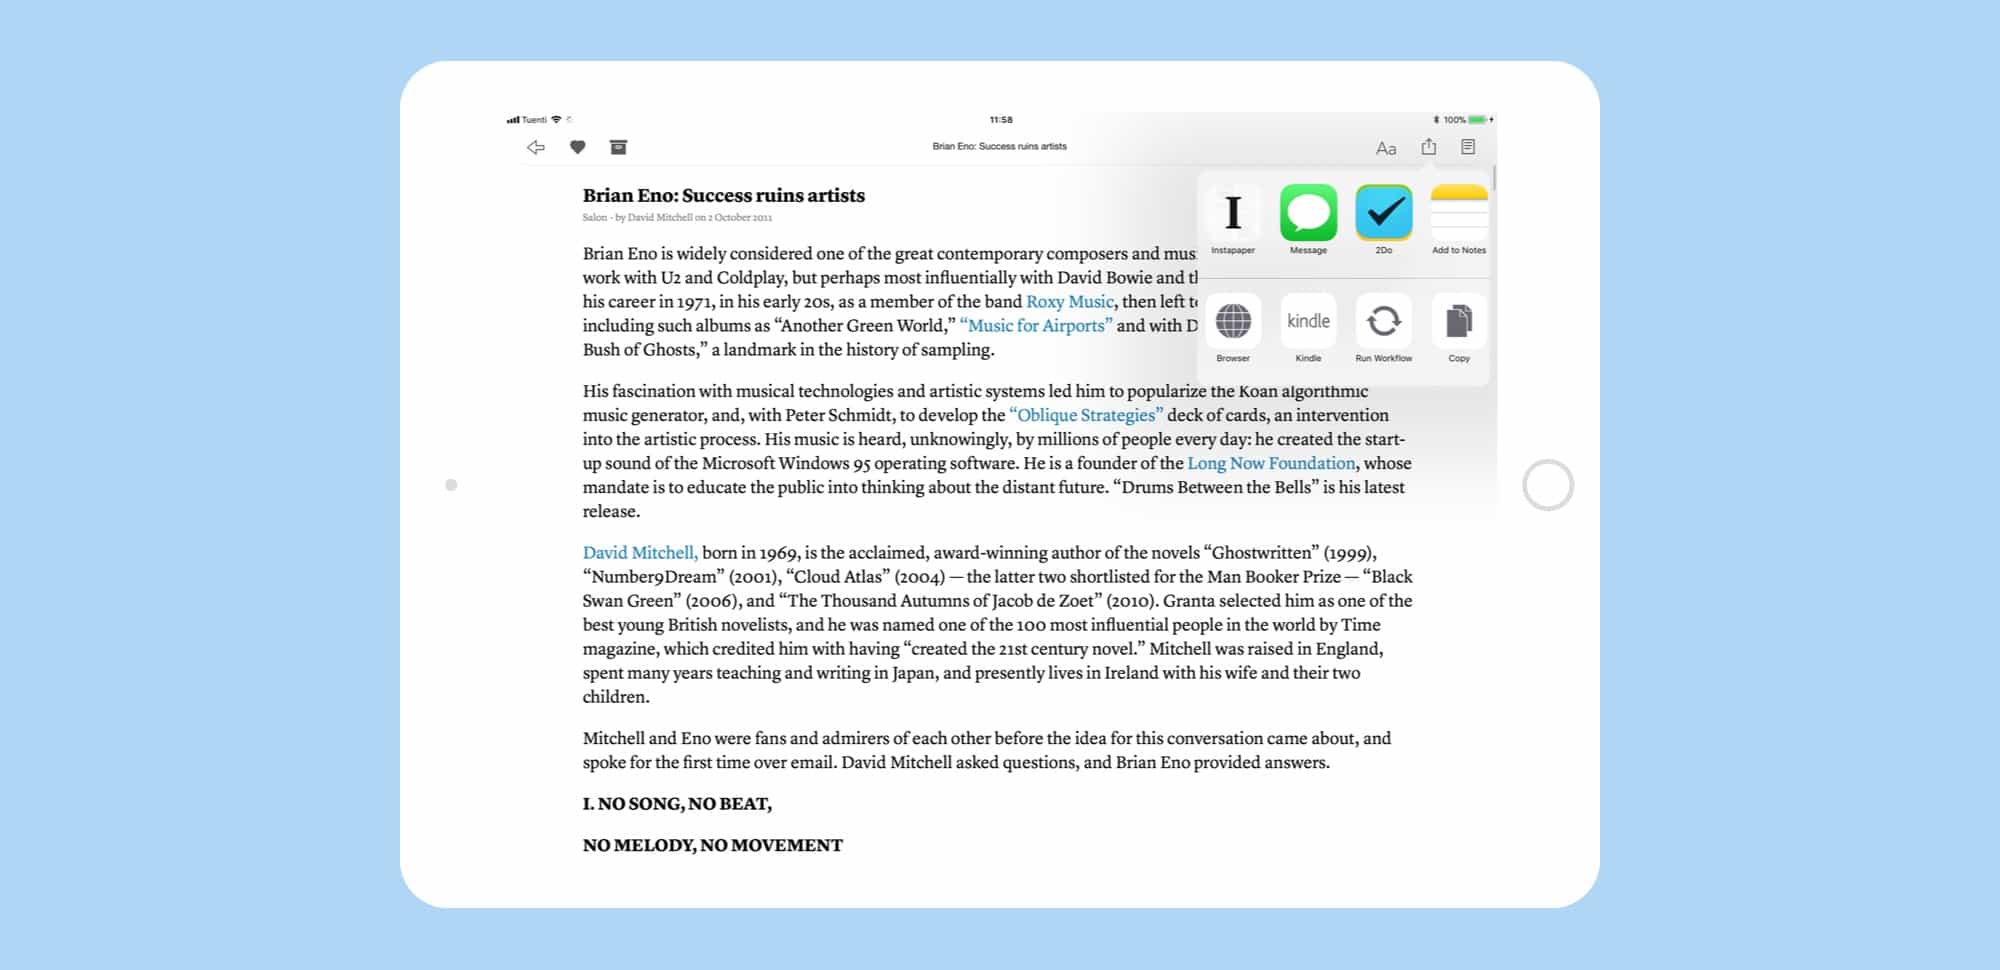 Sharing from Instapaper is super easy.